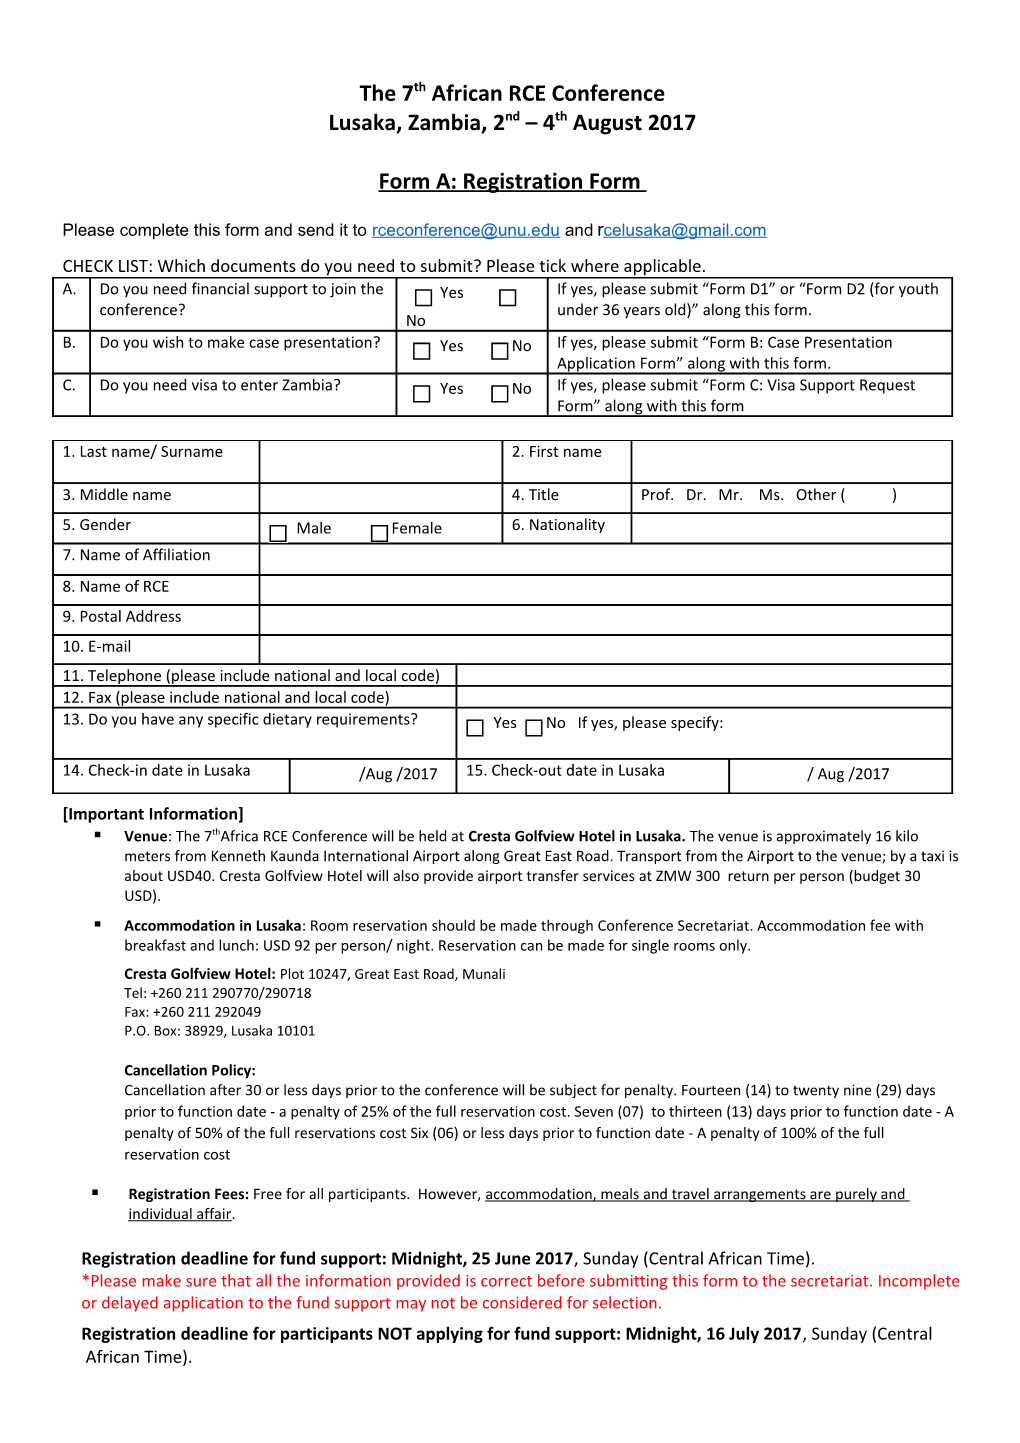 Please Complete This Form and Send It to And